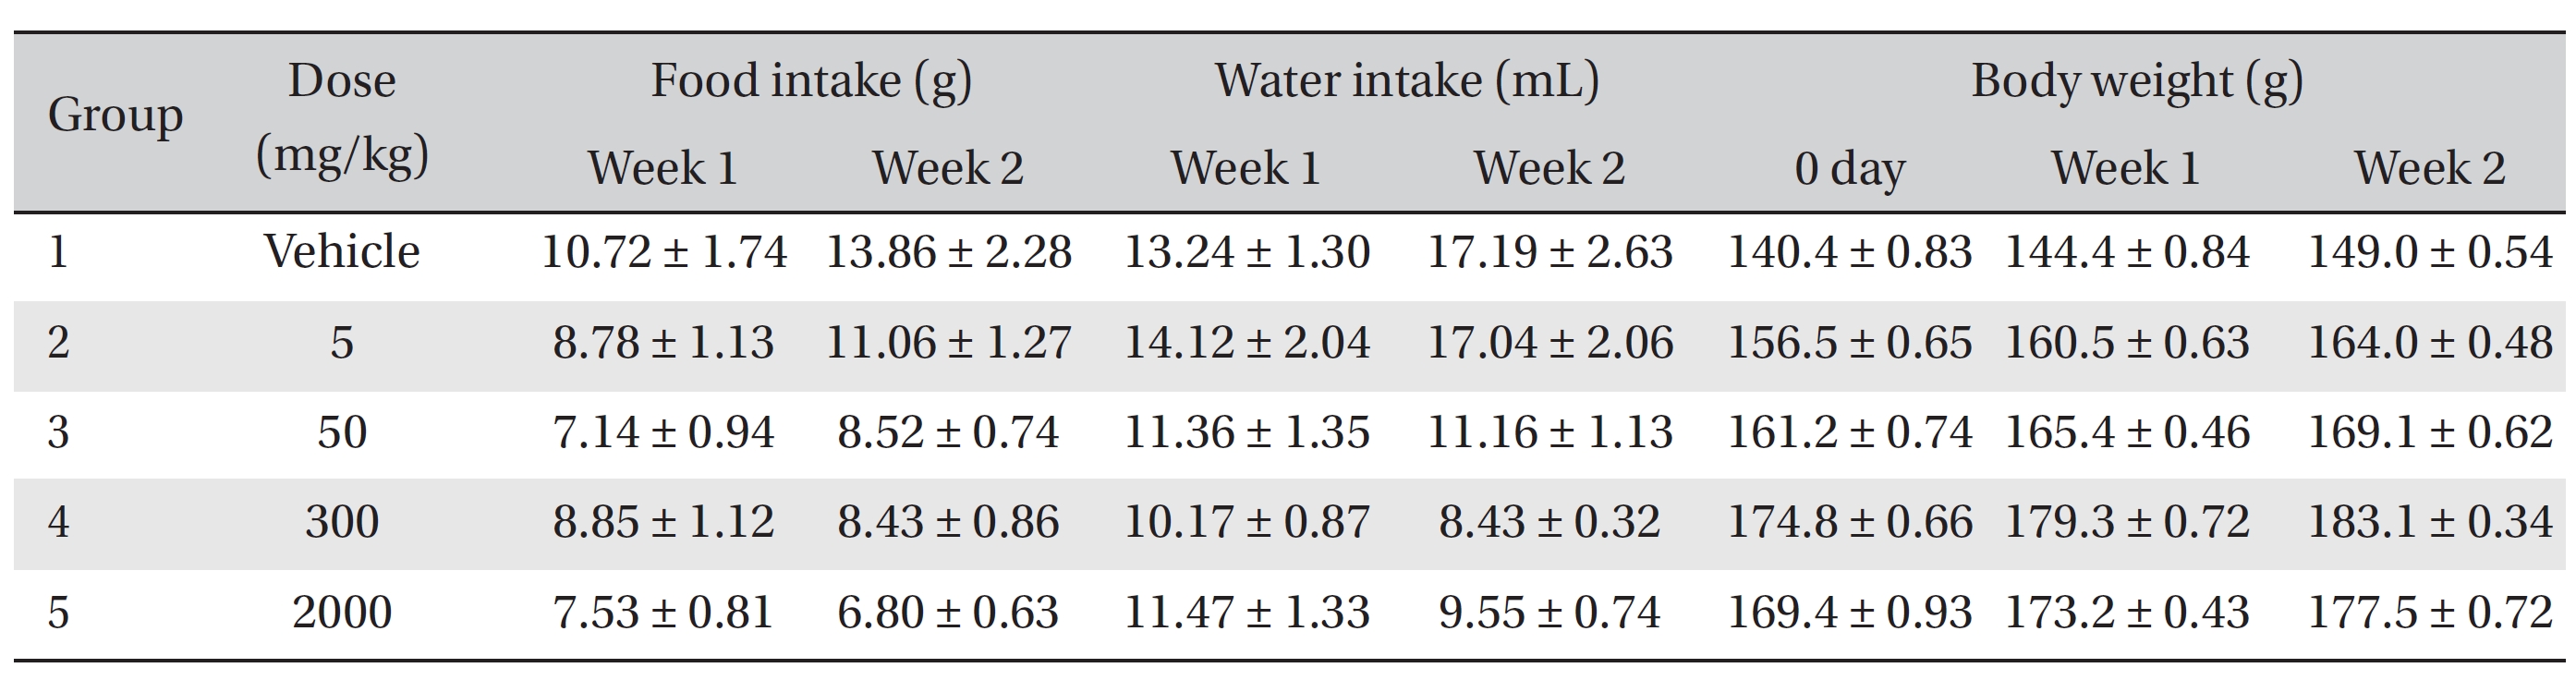 Variations of mean food and water intakes by and body weights of rats following oral administration of test extract of W. volubilis